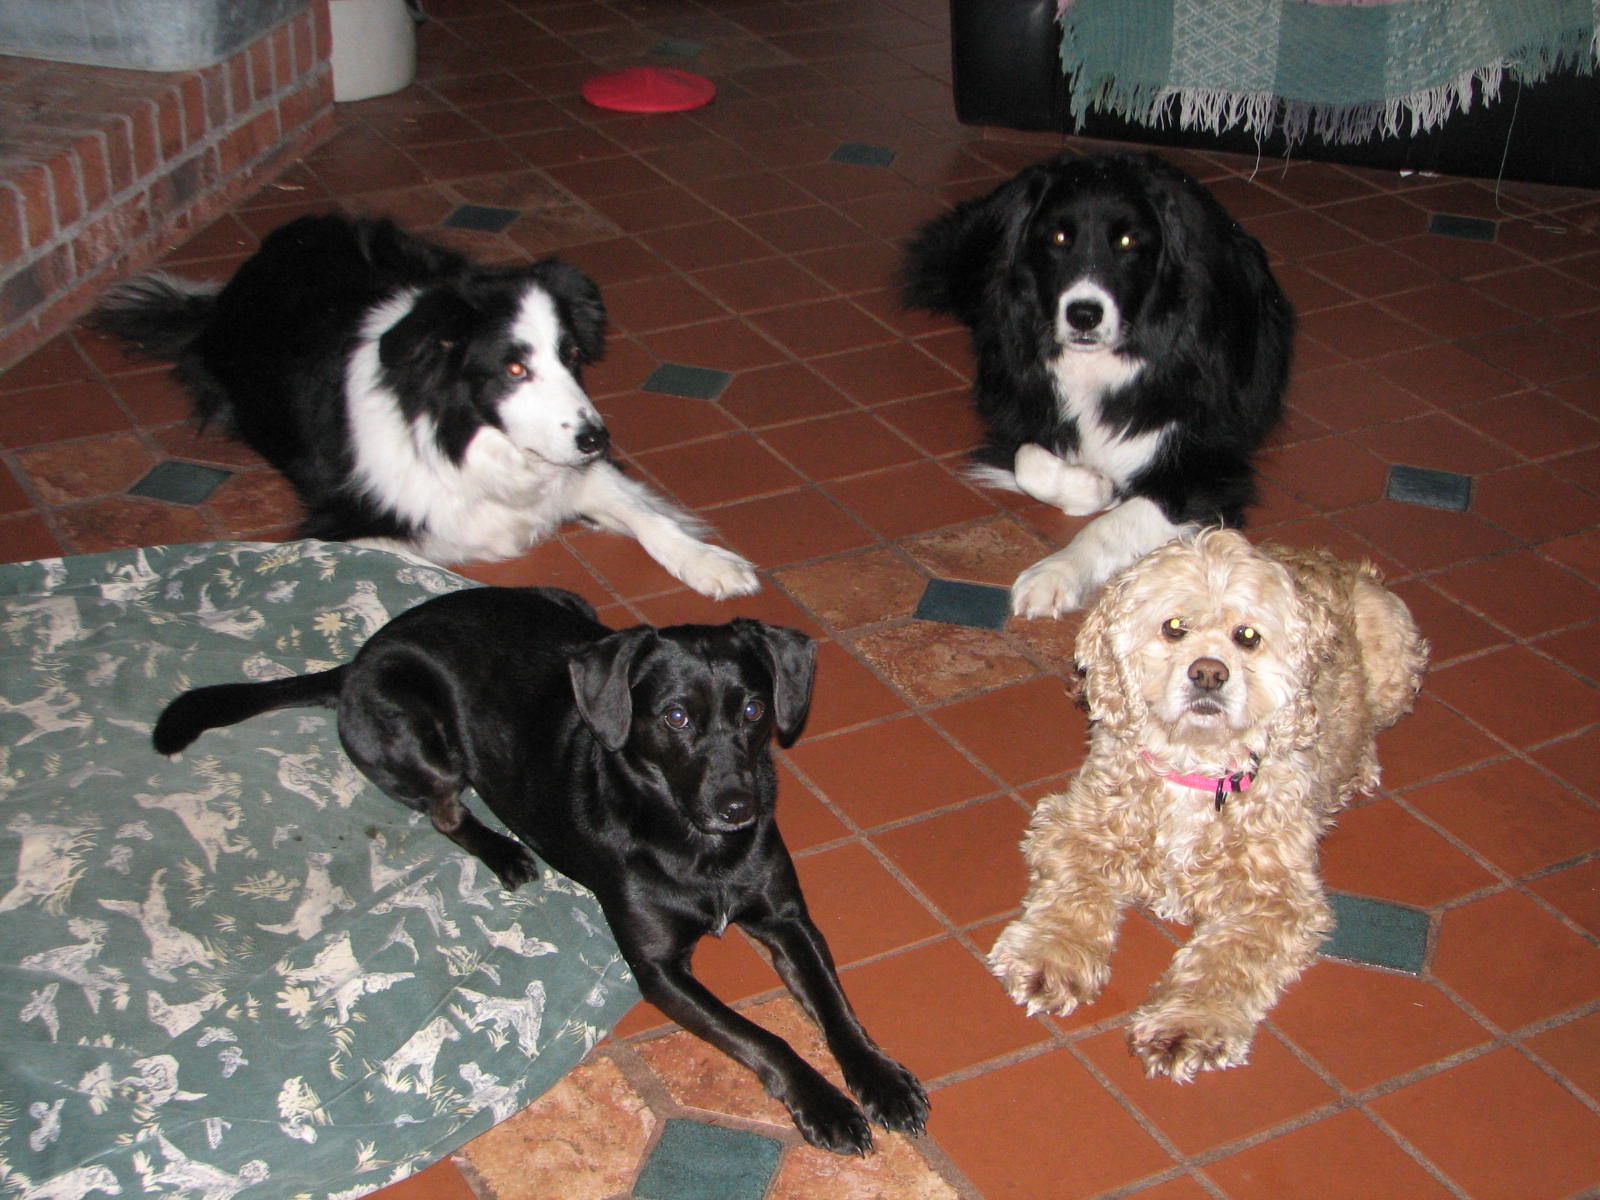 4 dogs down on the floor looking at the camera